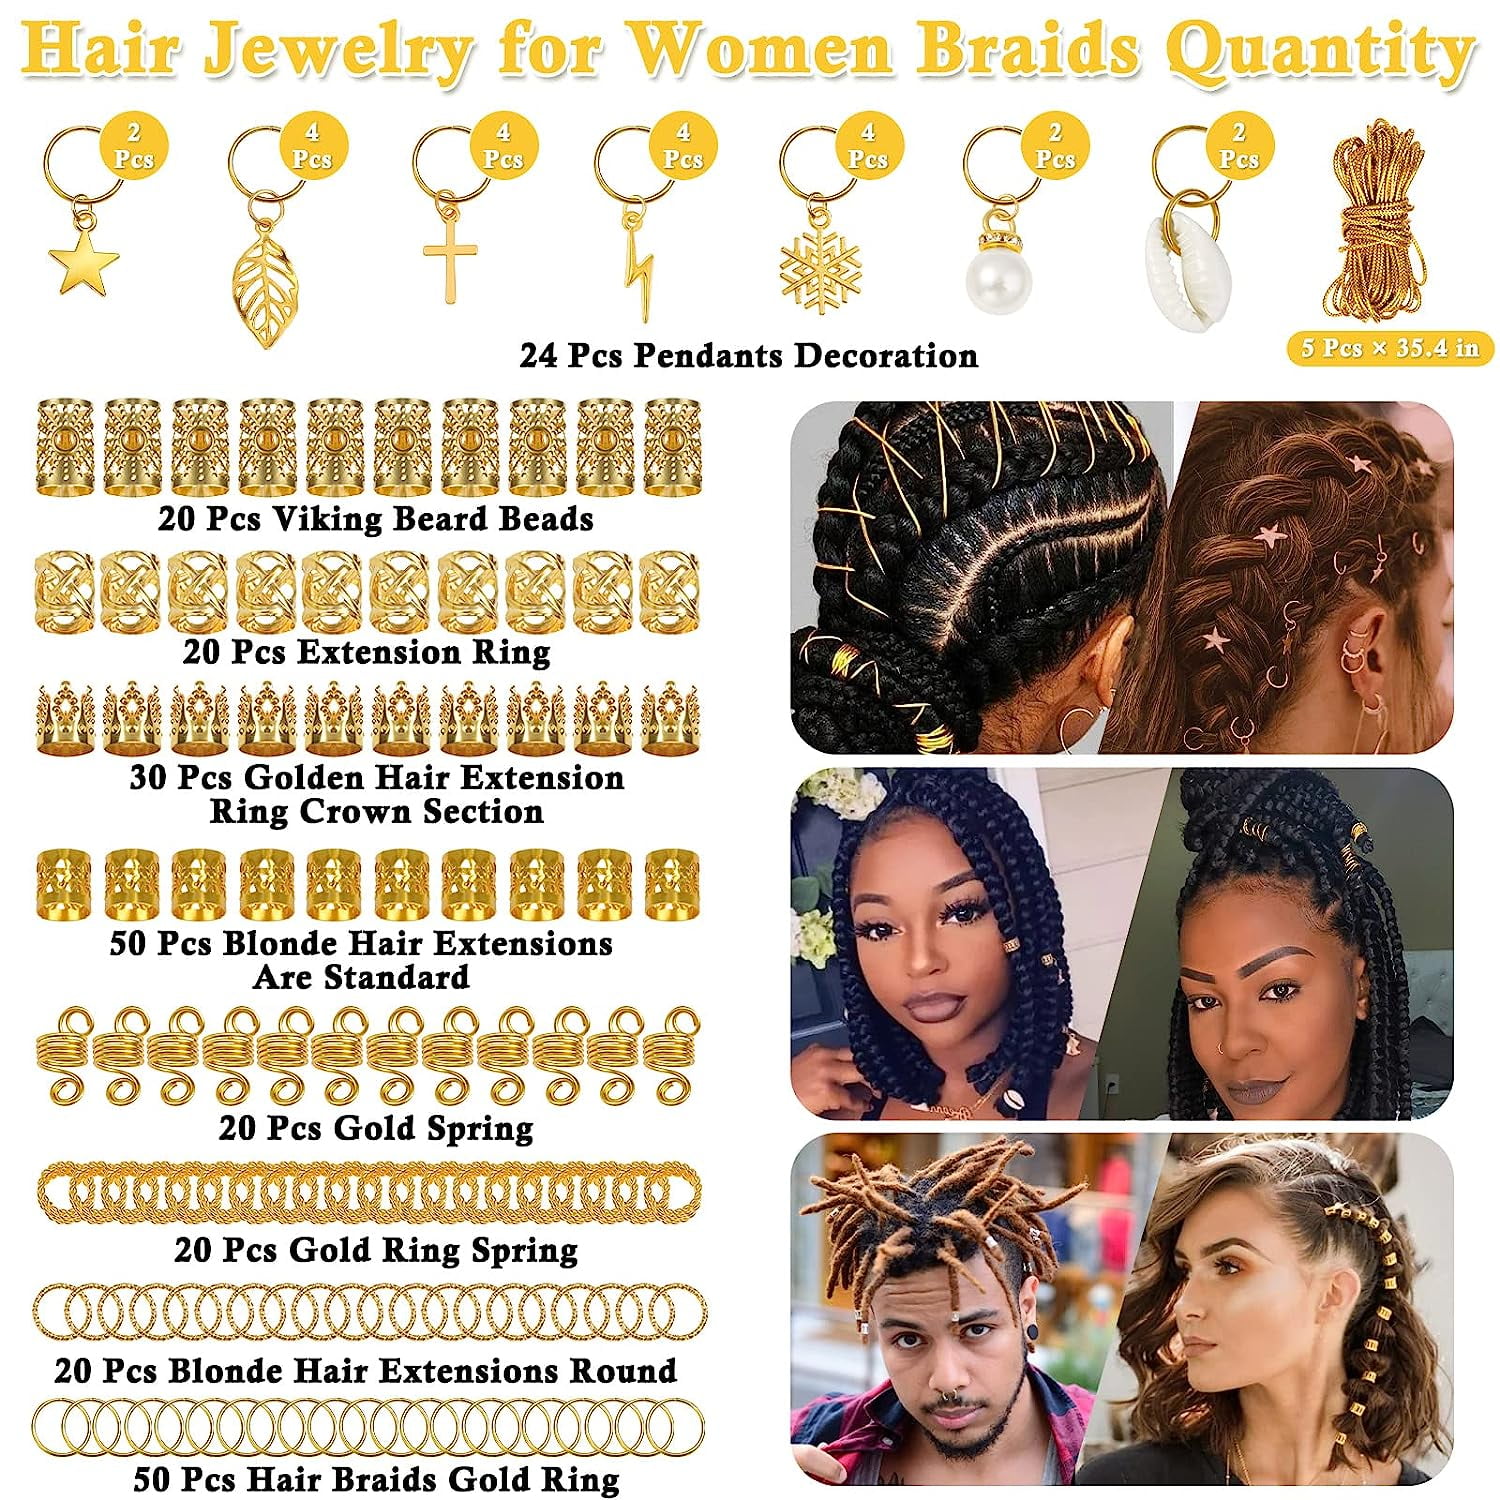 Up To 31% Off on 133 PCS Hair Jewelry for Locs